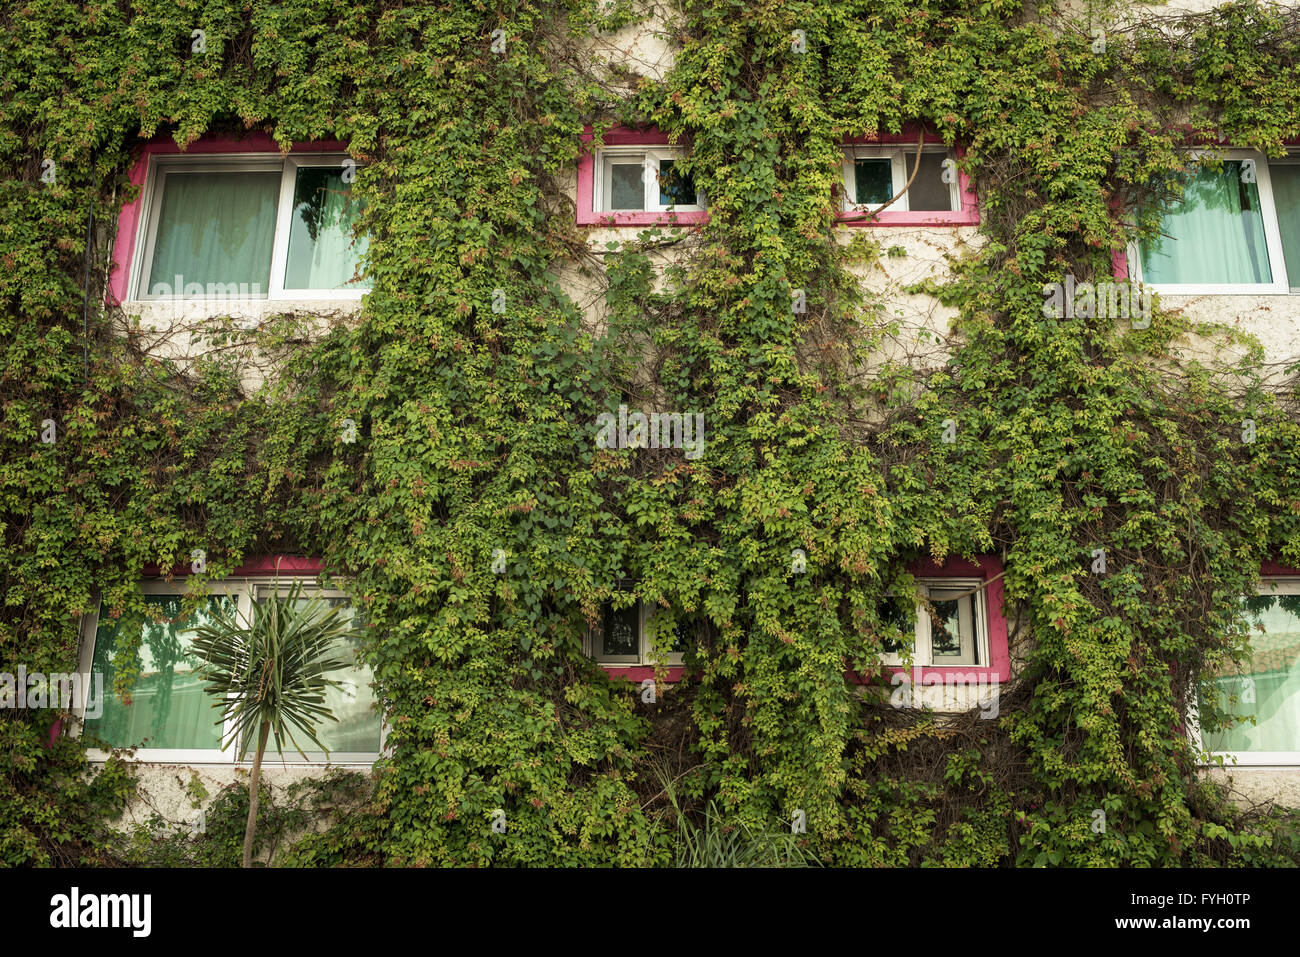 Outdoor view of eco friendly building facade, sustainable green architecture in the city. Stock Photo